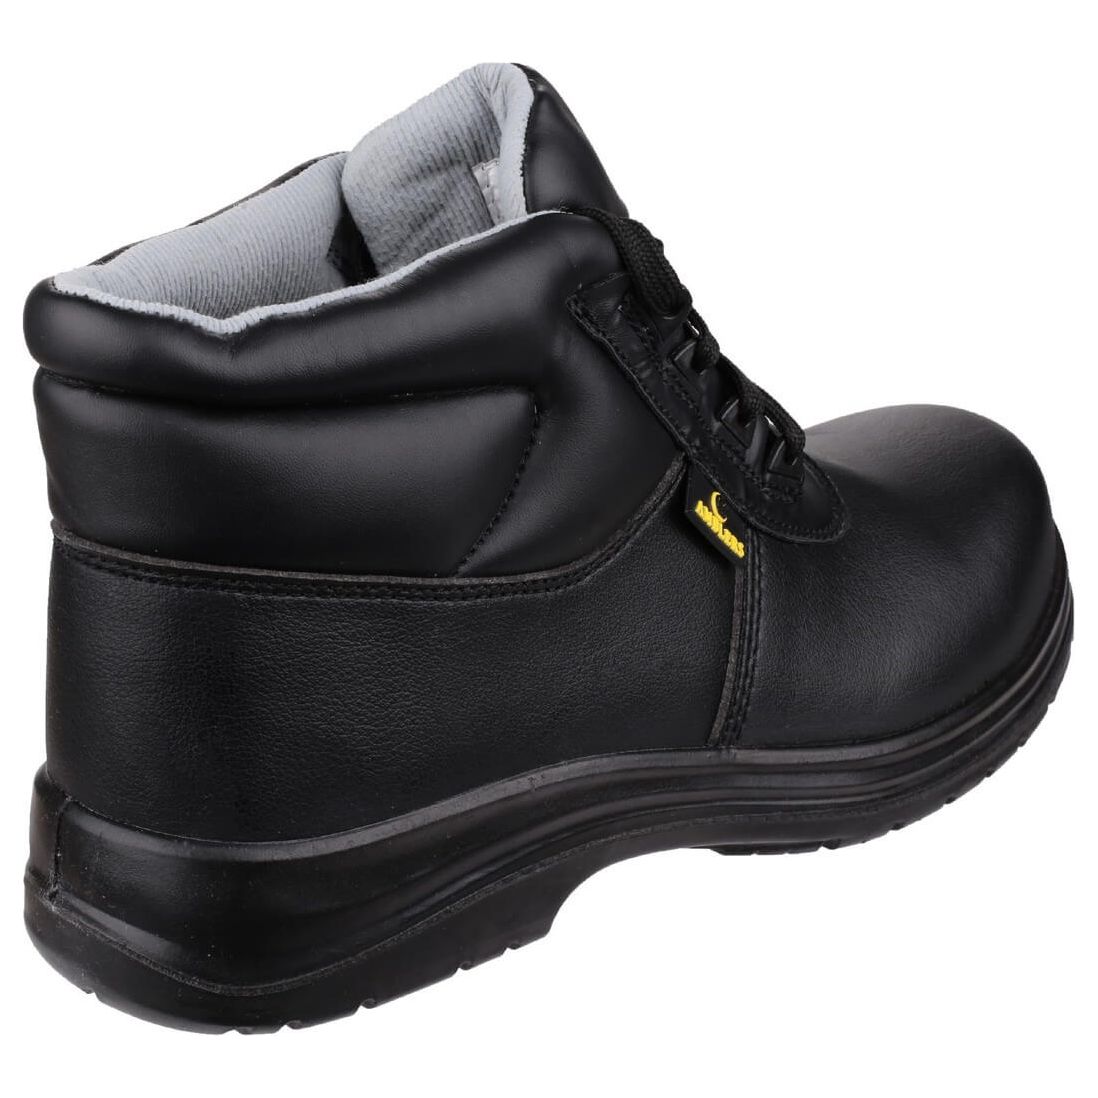 Amblers Fs663 Metal-Free Water-Resistant Safety Boots Womens - workweargurus.com